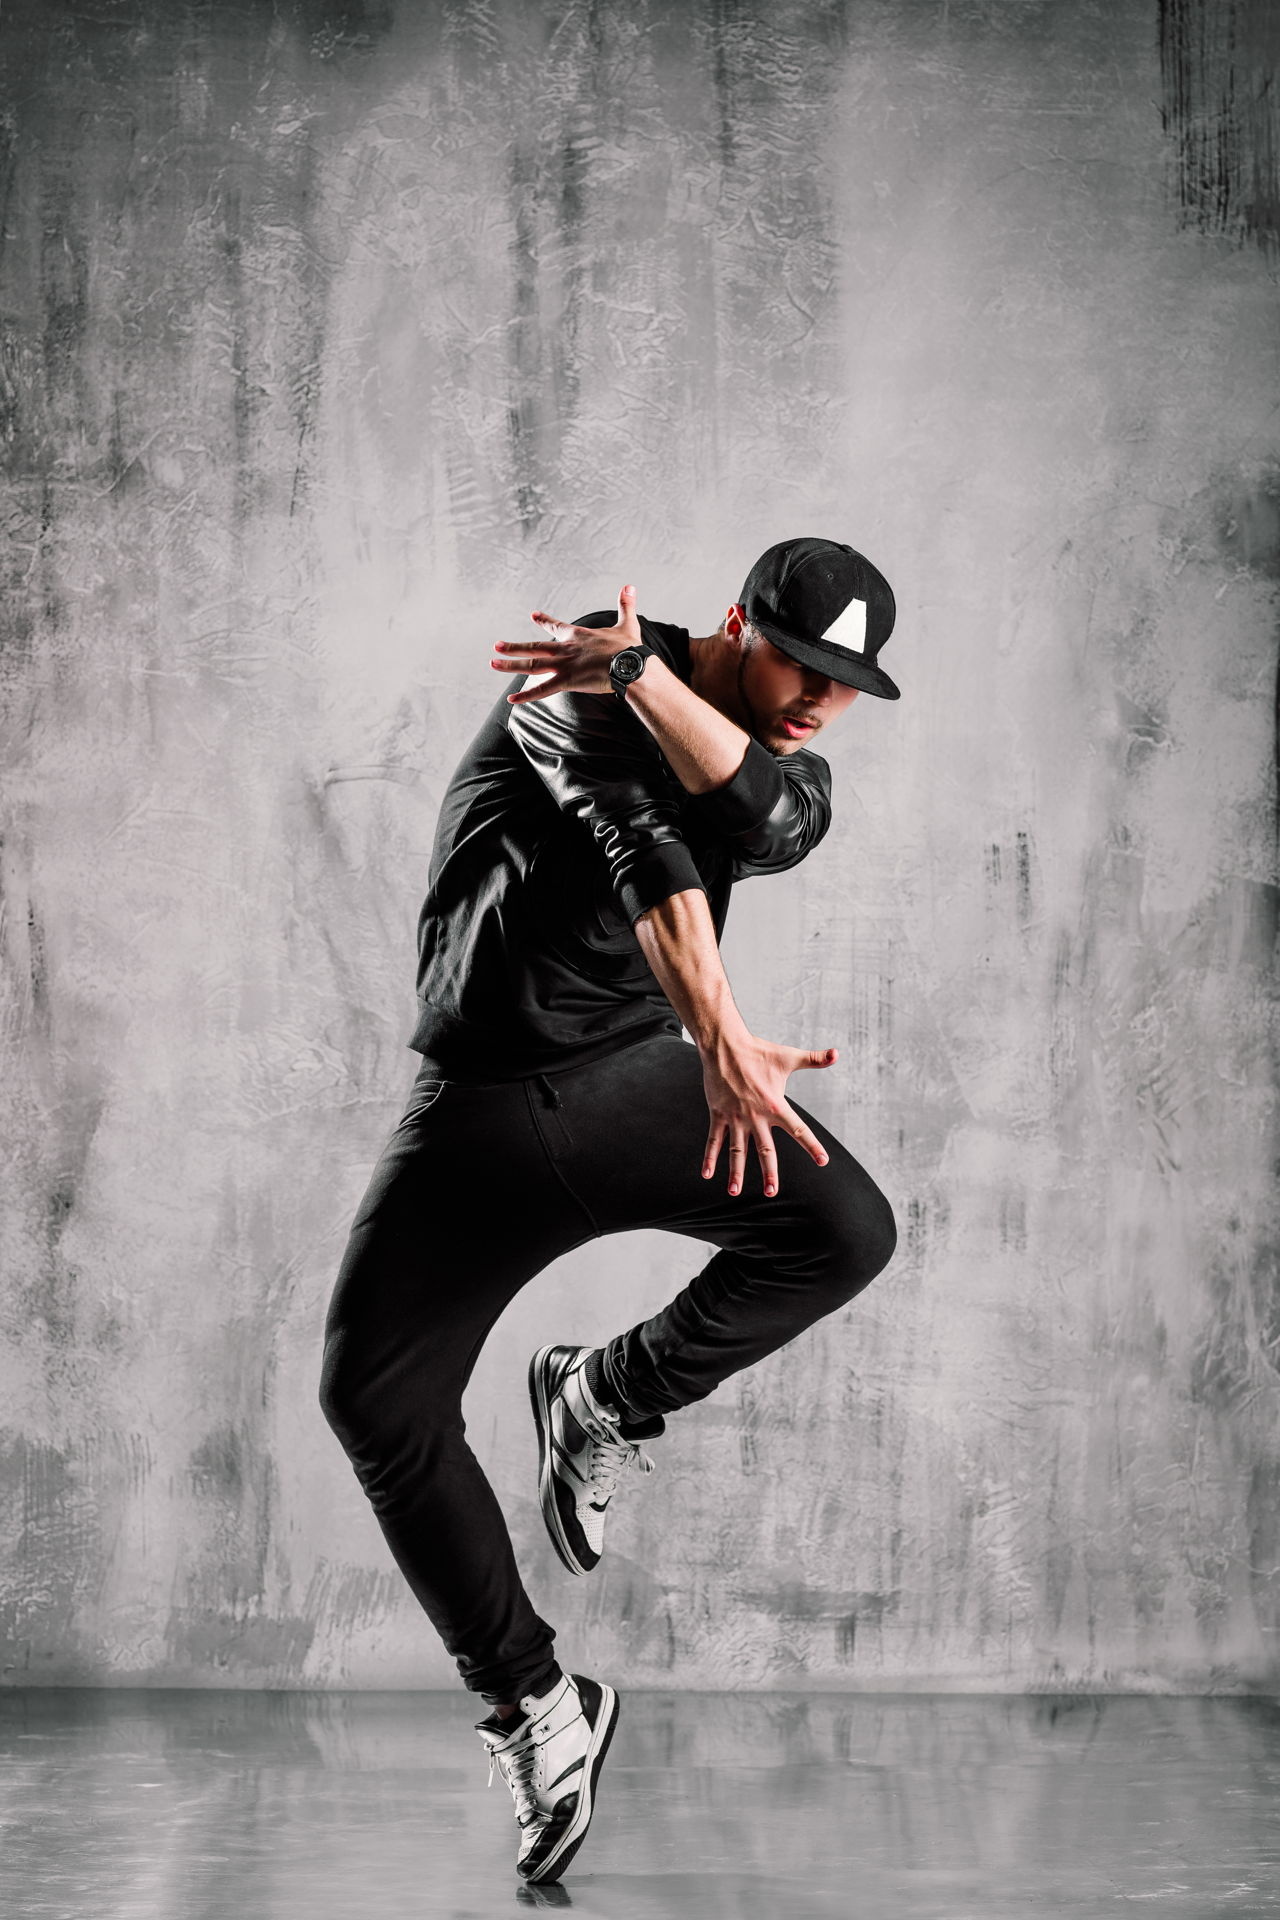 Popping Dance: Hip Hop dance moves, A street dance that came from California during the 1960s-70s. 1280x1920 HD Wallpaper.